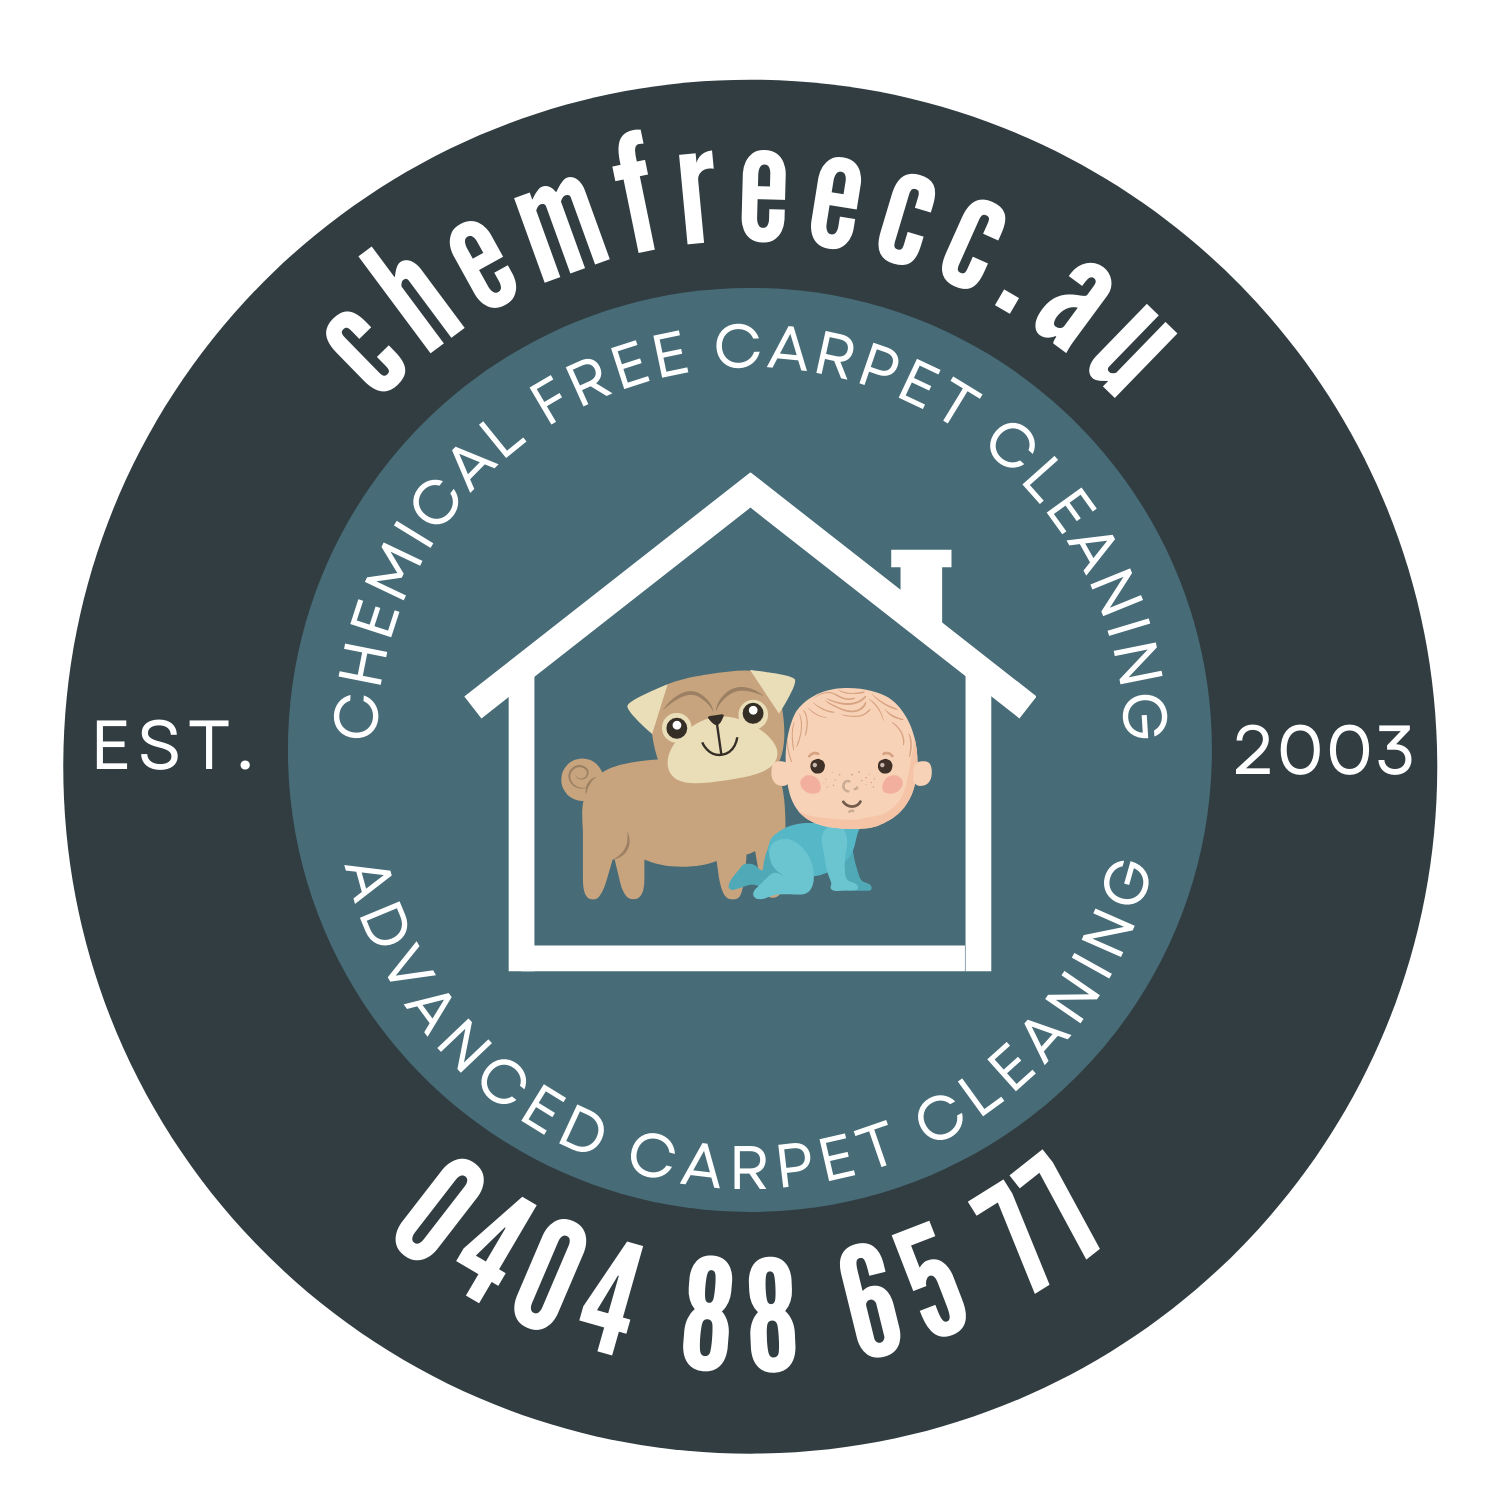 Chemical Free Carpet Cleaning 0404 88 65 77